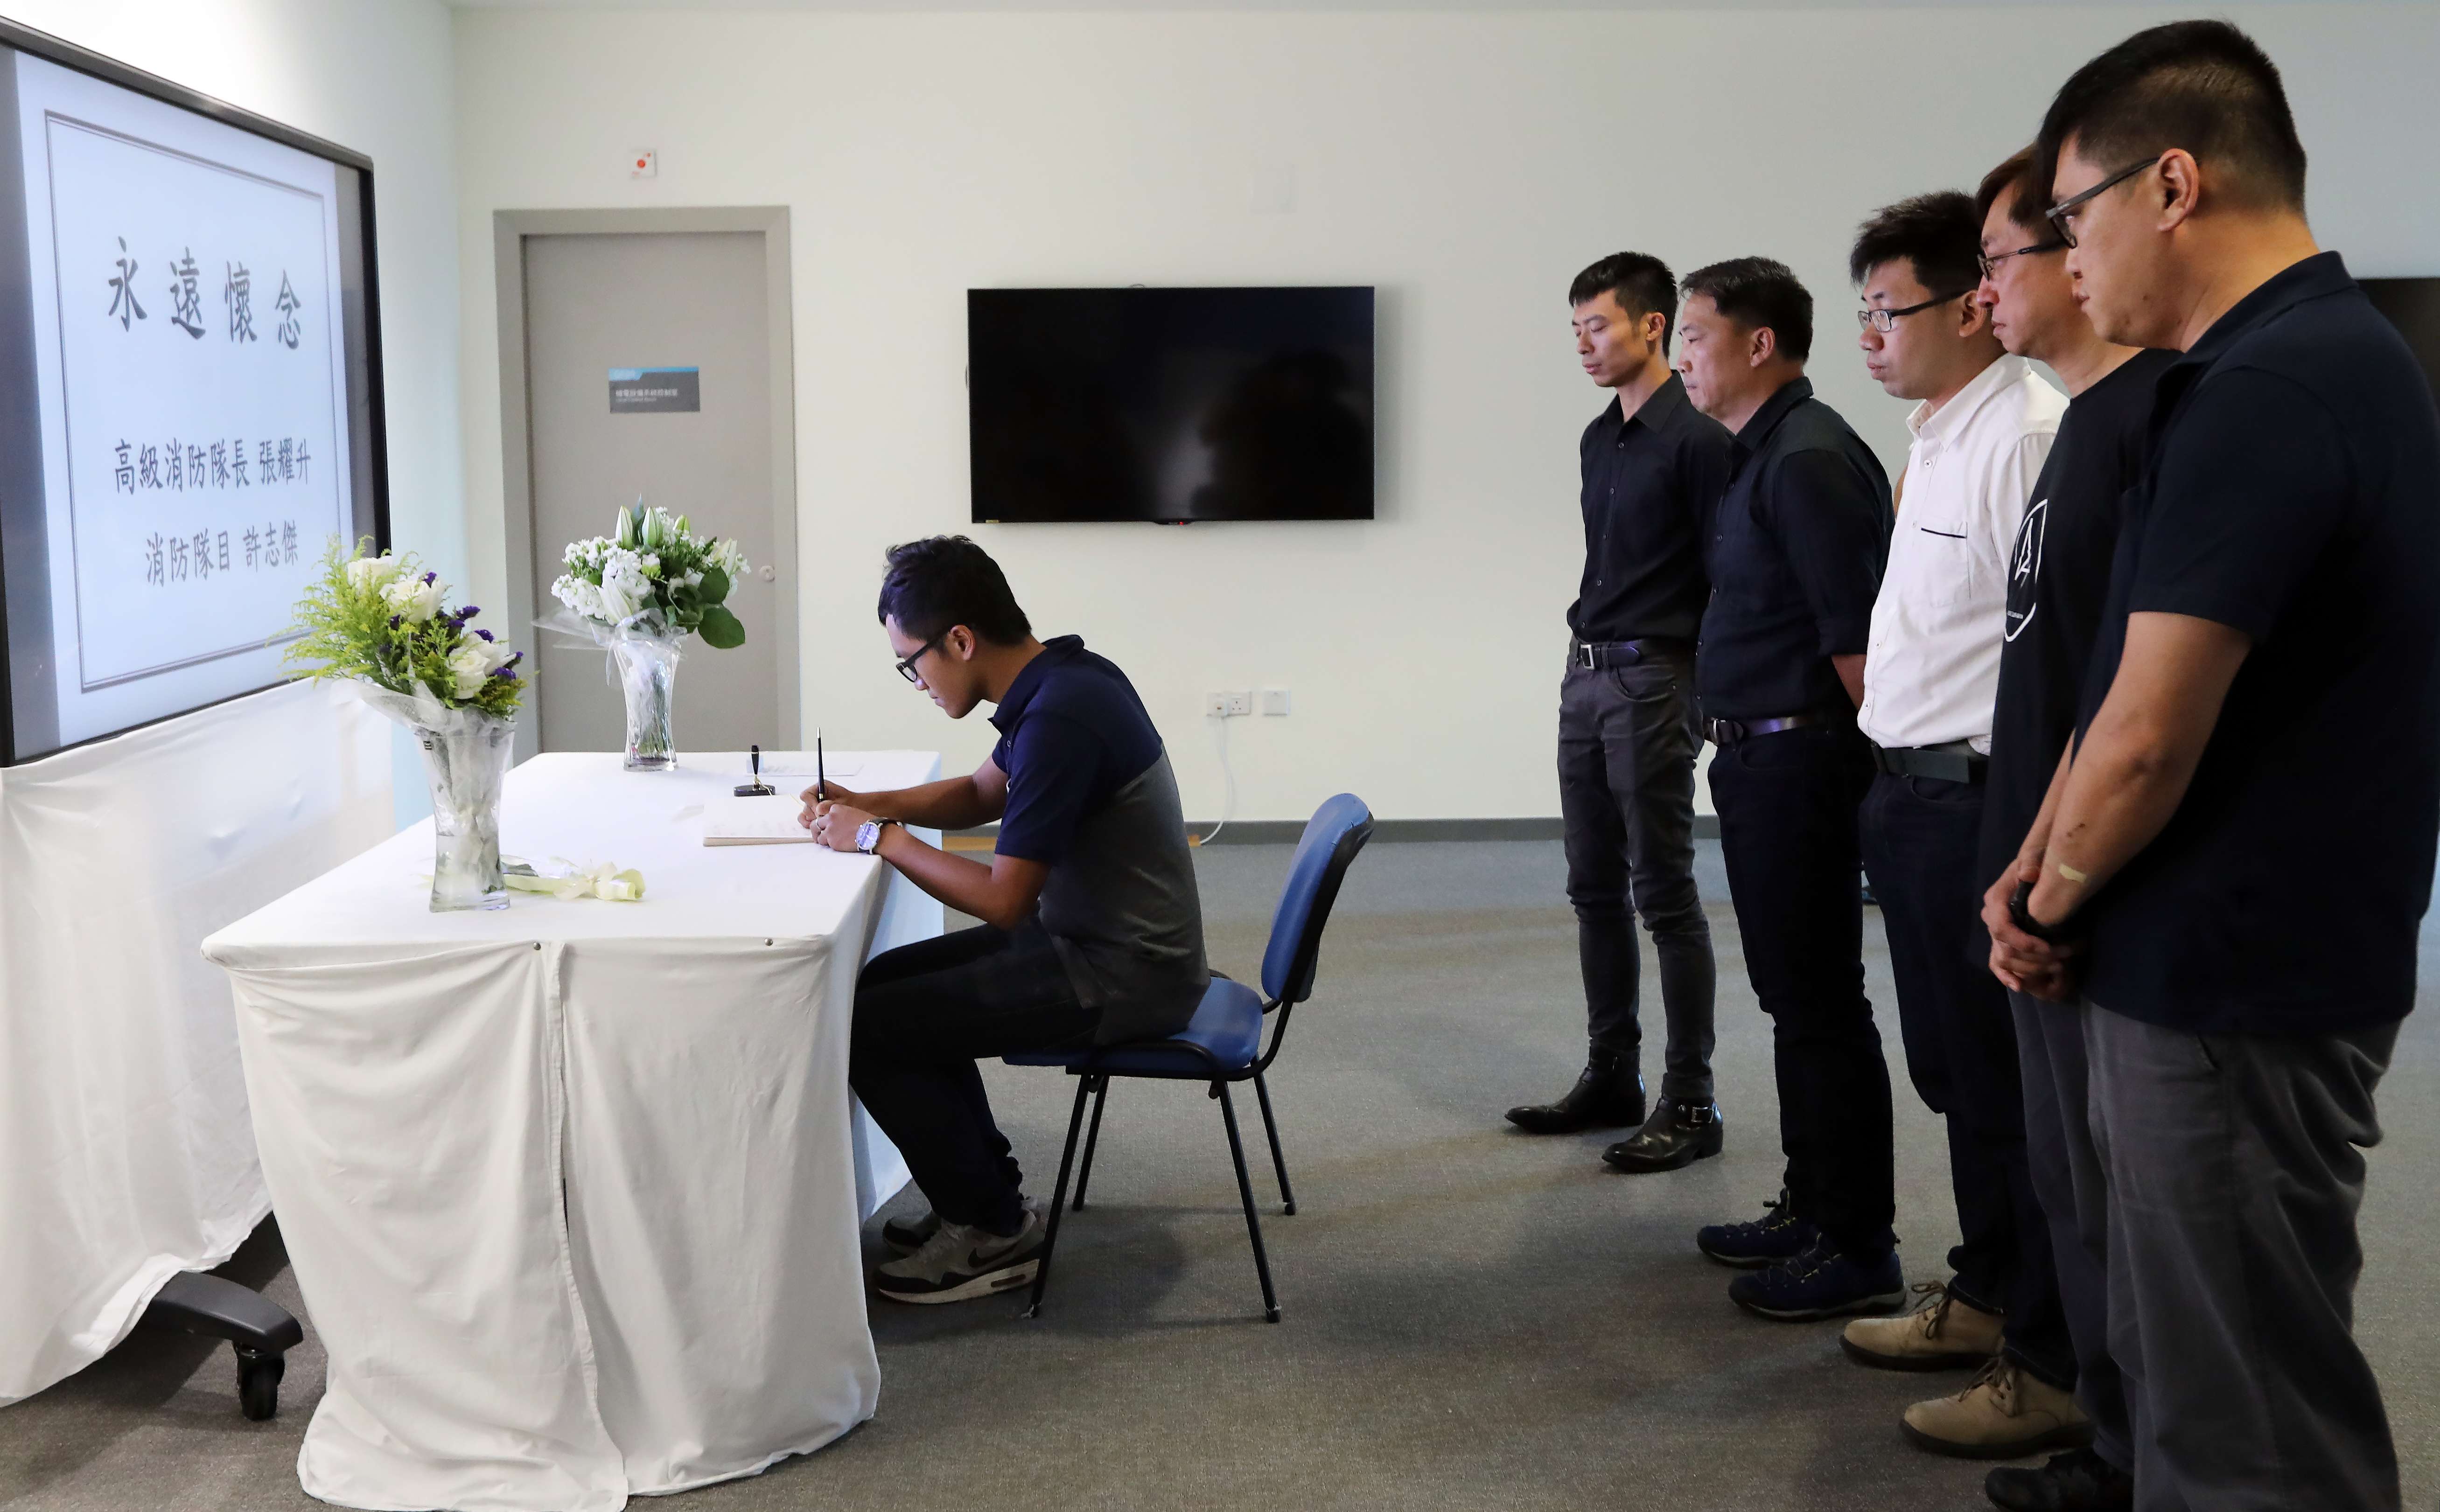 The book of condolence is available for signing on both Friday and Saturday from 9am to 9pm. Photo: Edward Wong